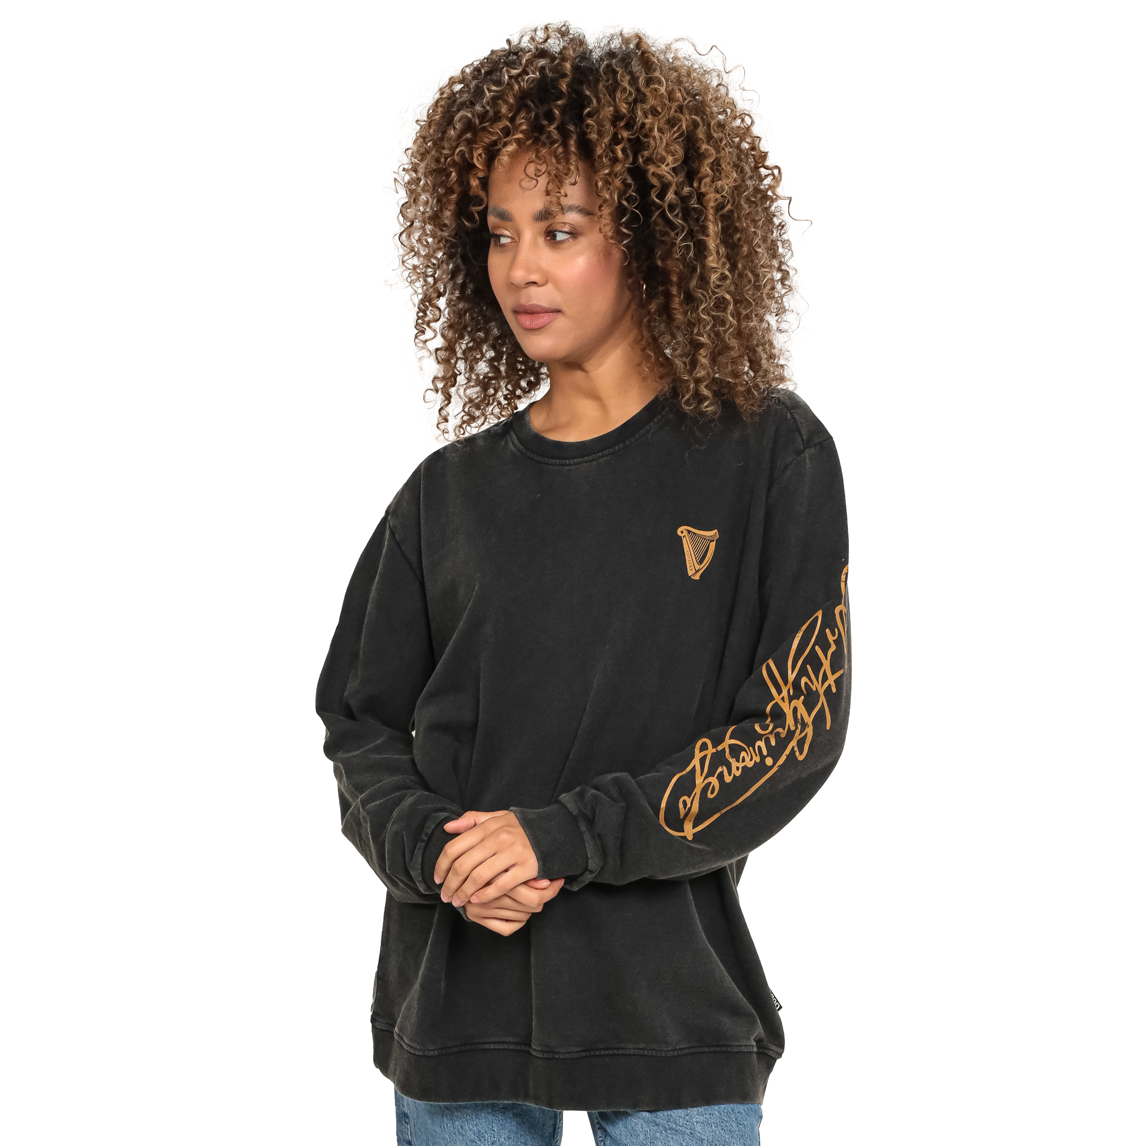 A woman wearing a cozy Guinness Harp Sweatshirt - Black Distressed Gold by Guinness UK with gold lettering.